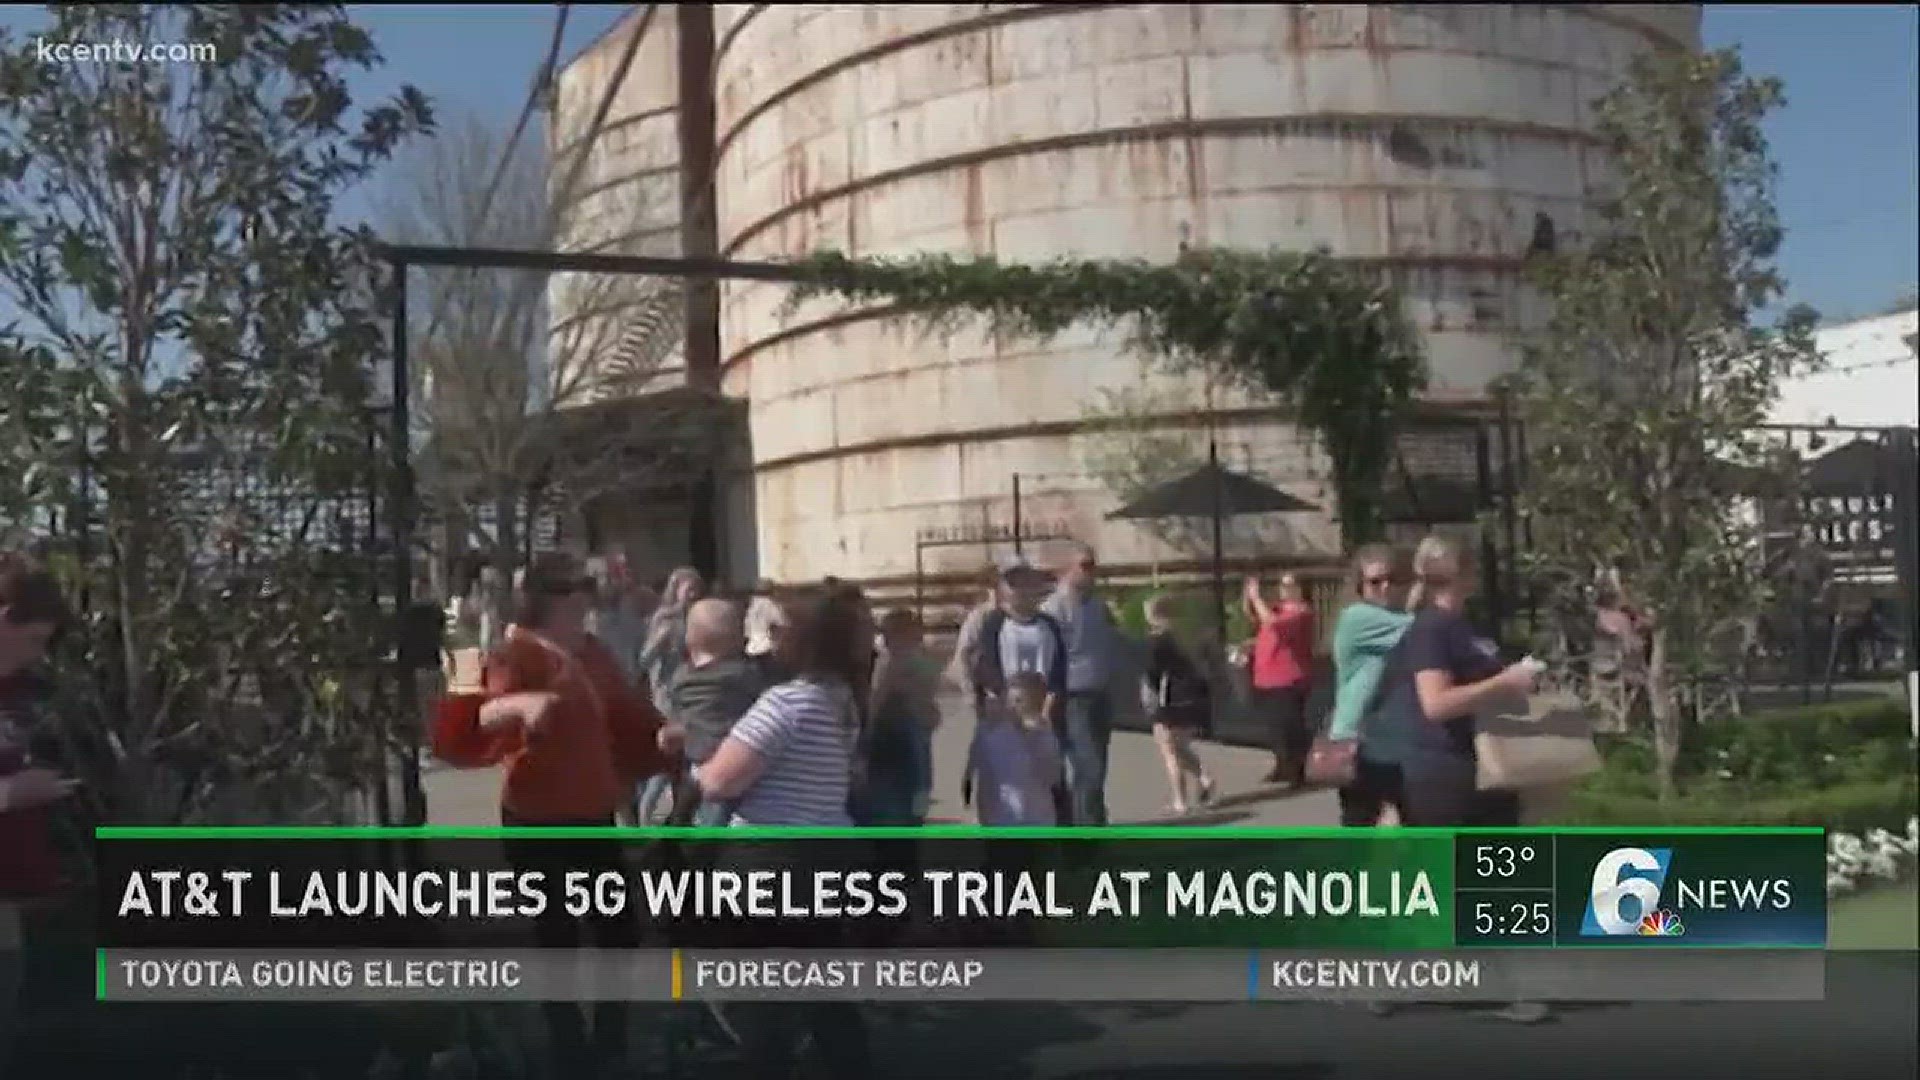 The largest 5G fixed wireless trial at AT&T is going on right now at the Silos at Magnolia.